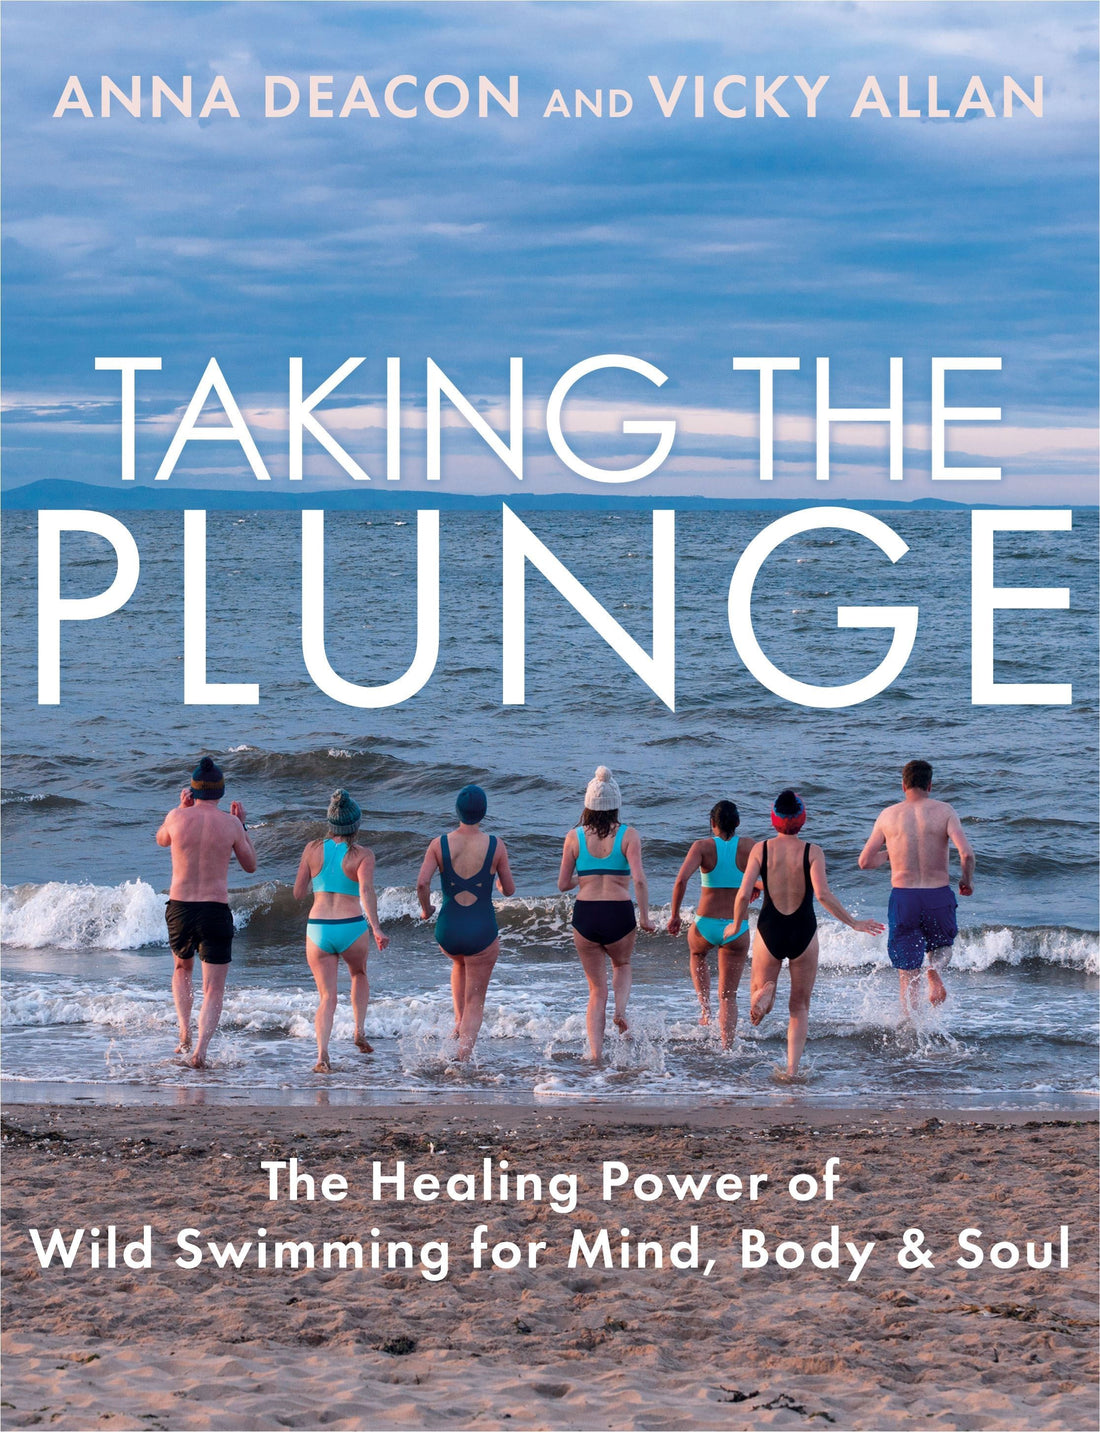 Taking The Plunge (Wild Swimming) by Anna Deacon &amp; Vicky Allan